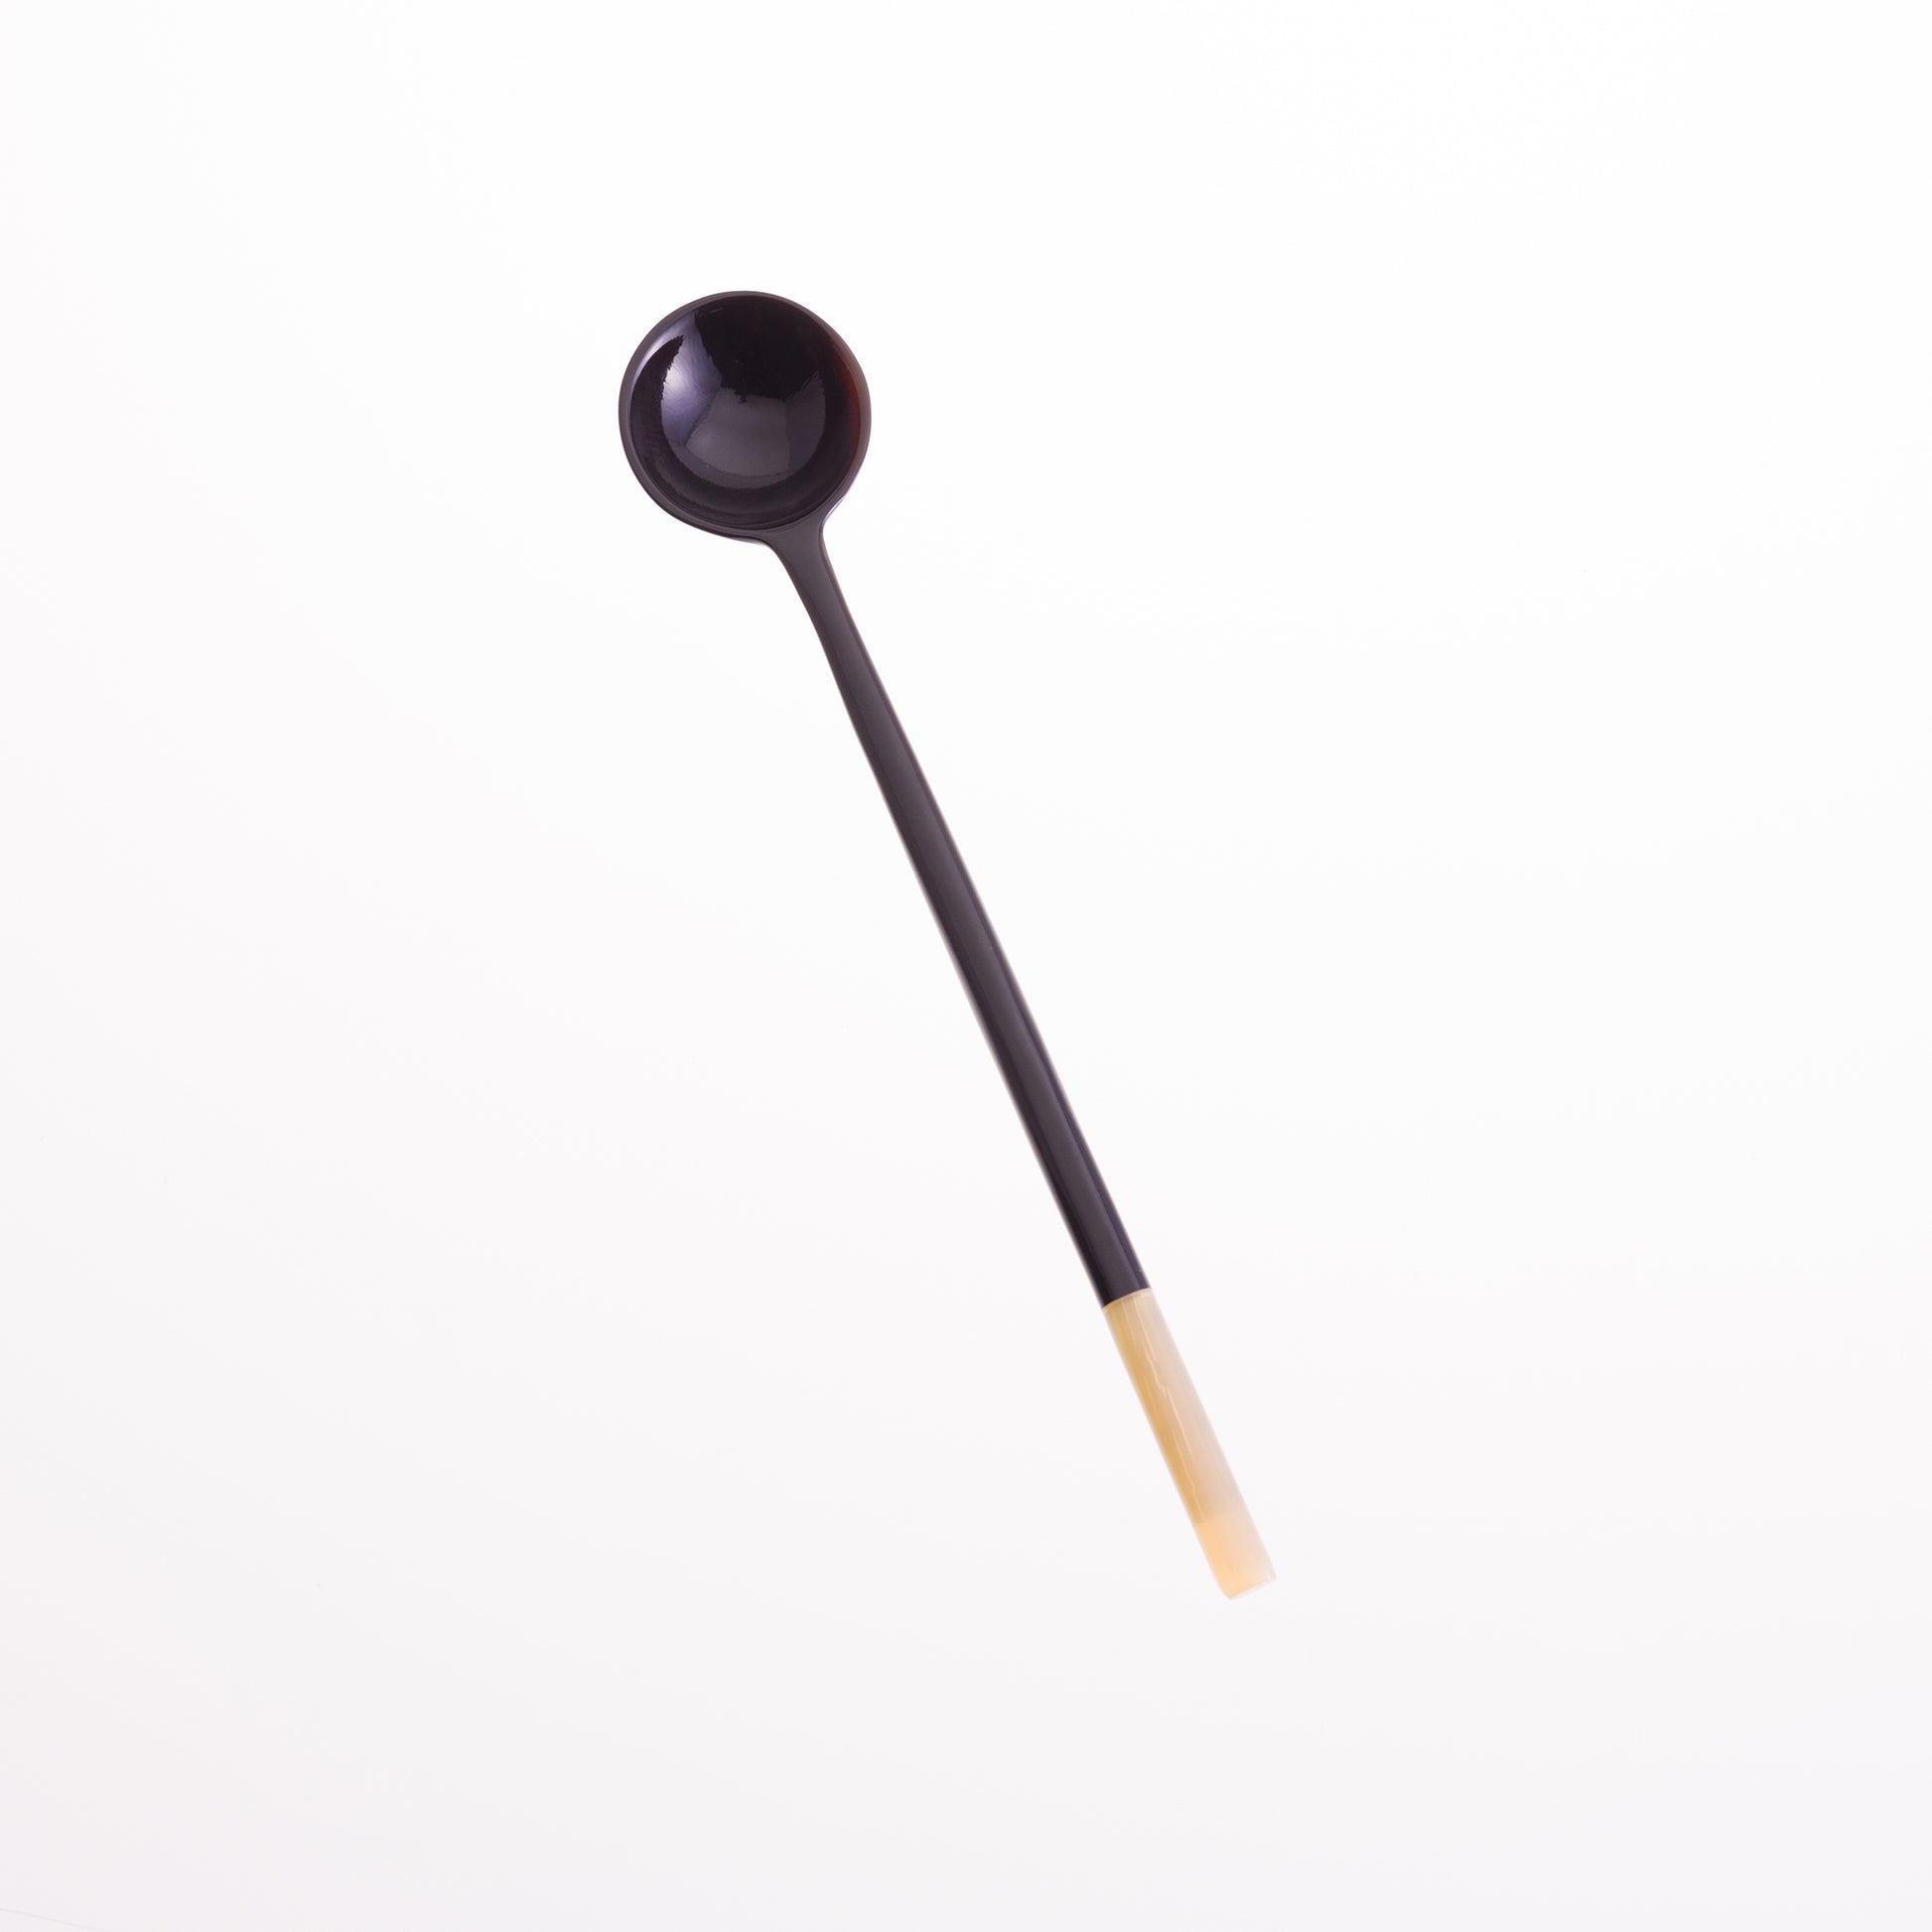 Long handled olive spoon made from black horn with a natural horn tip